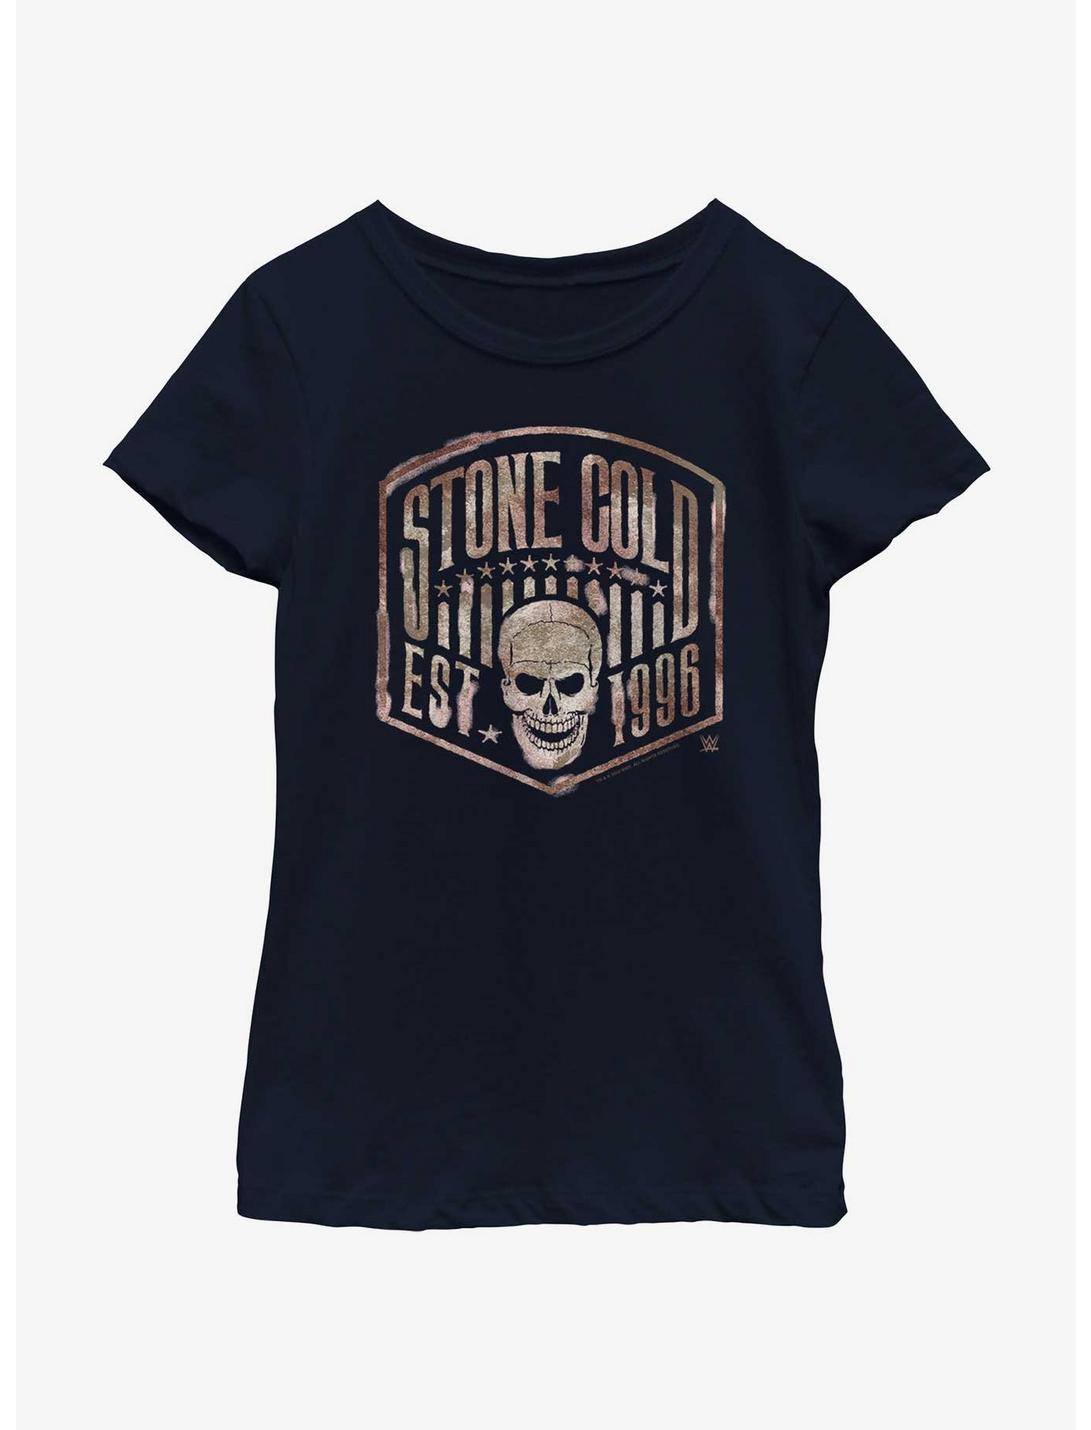 WWE Stone Cold Skull Crest Youth Girls T-Shirt, NAVY, hi-res